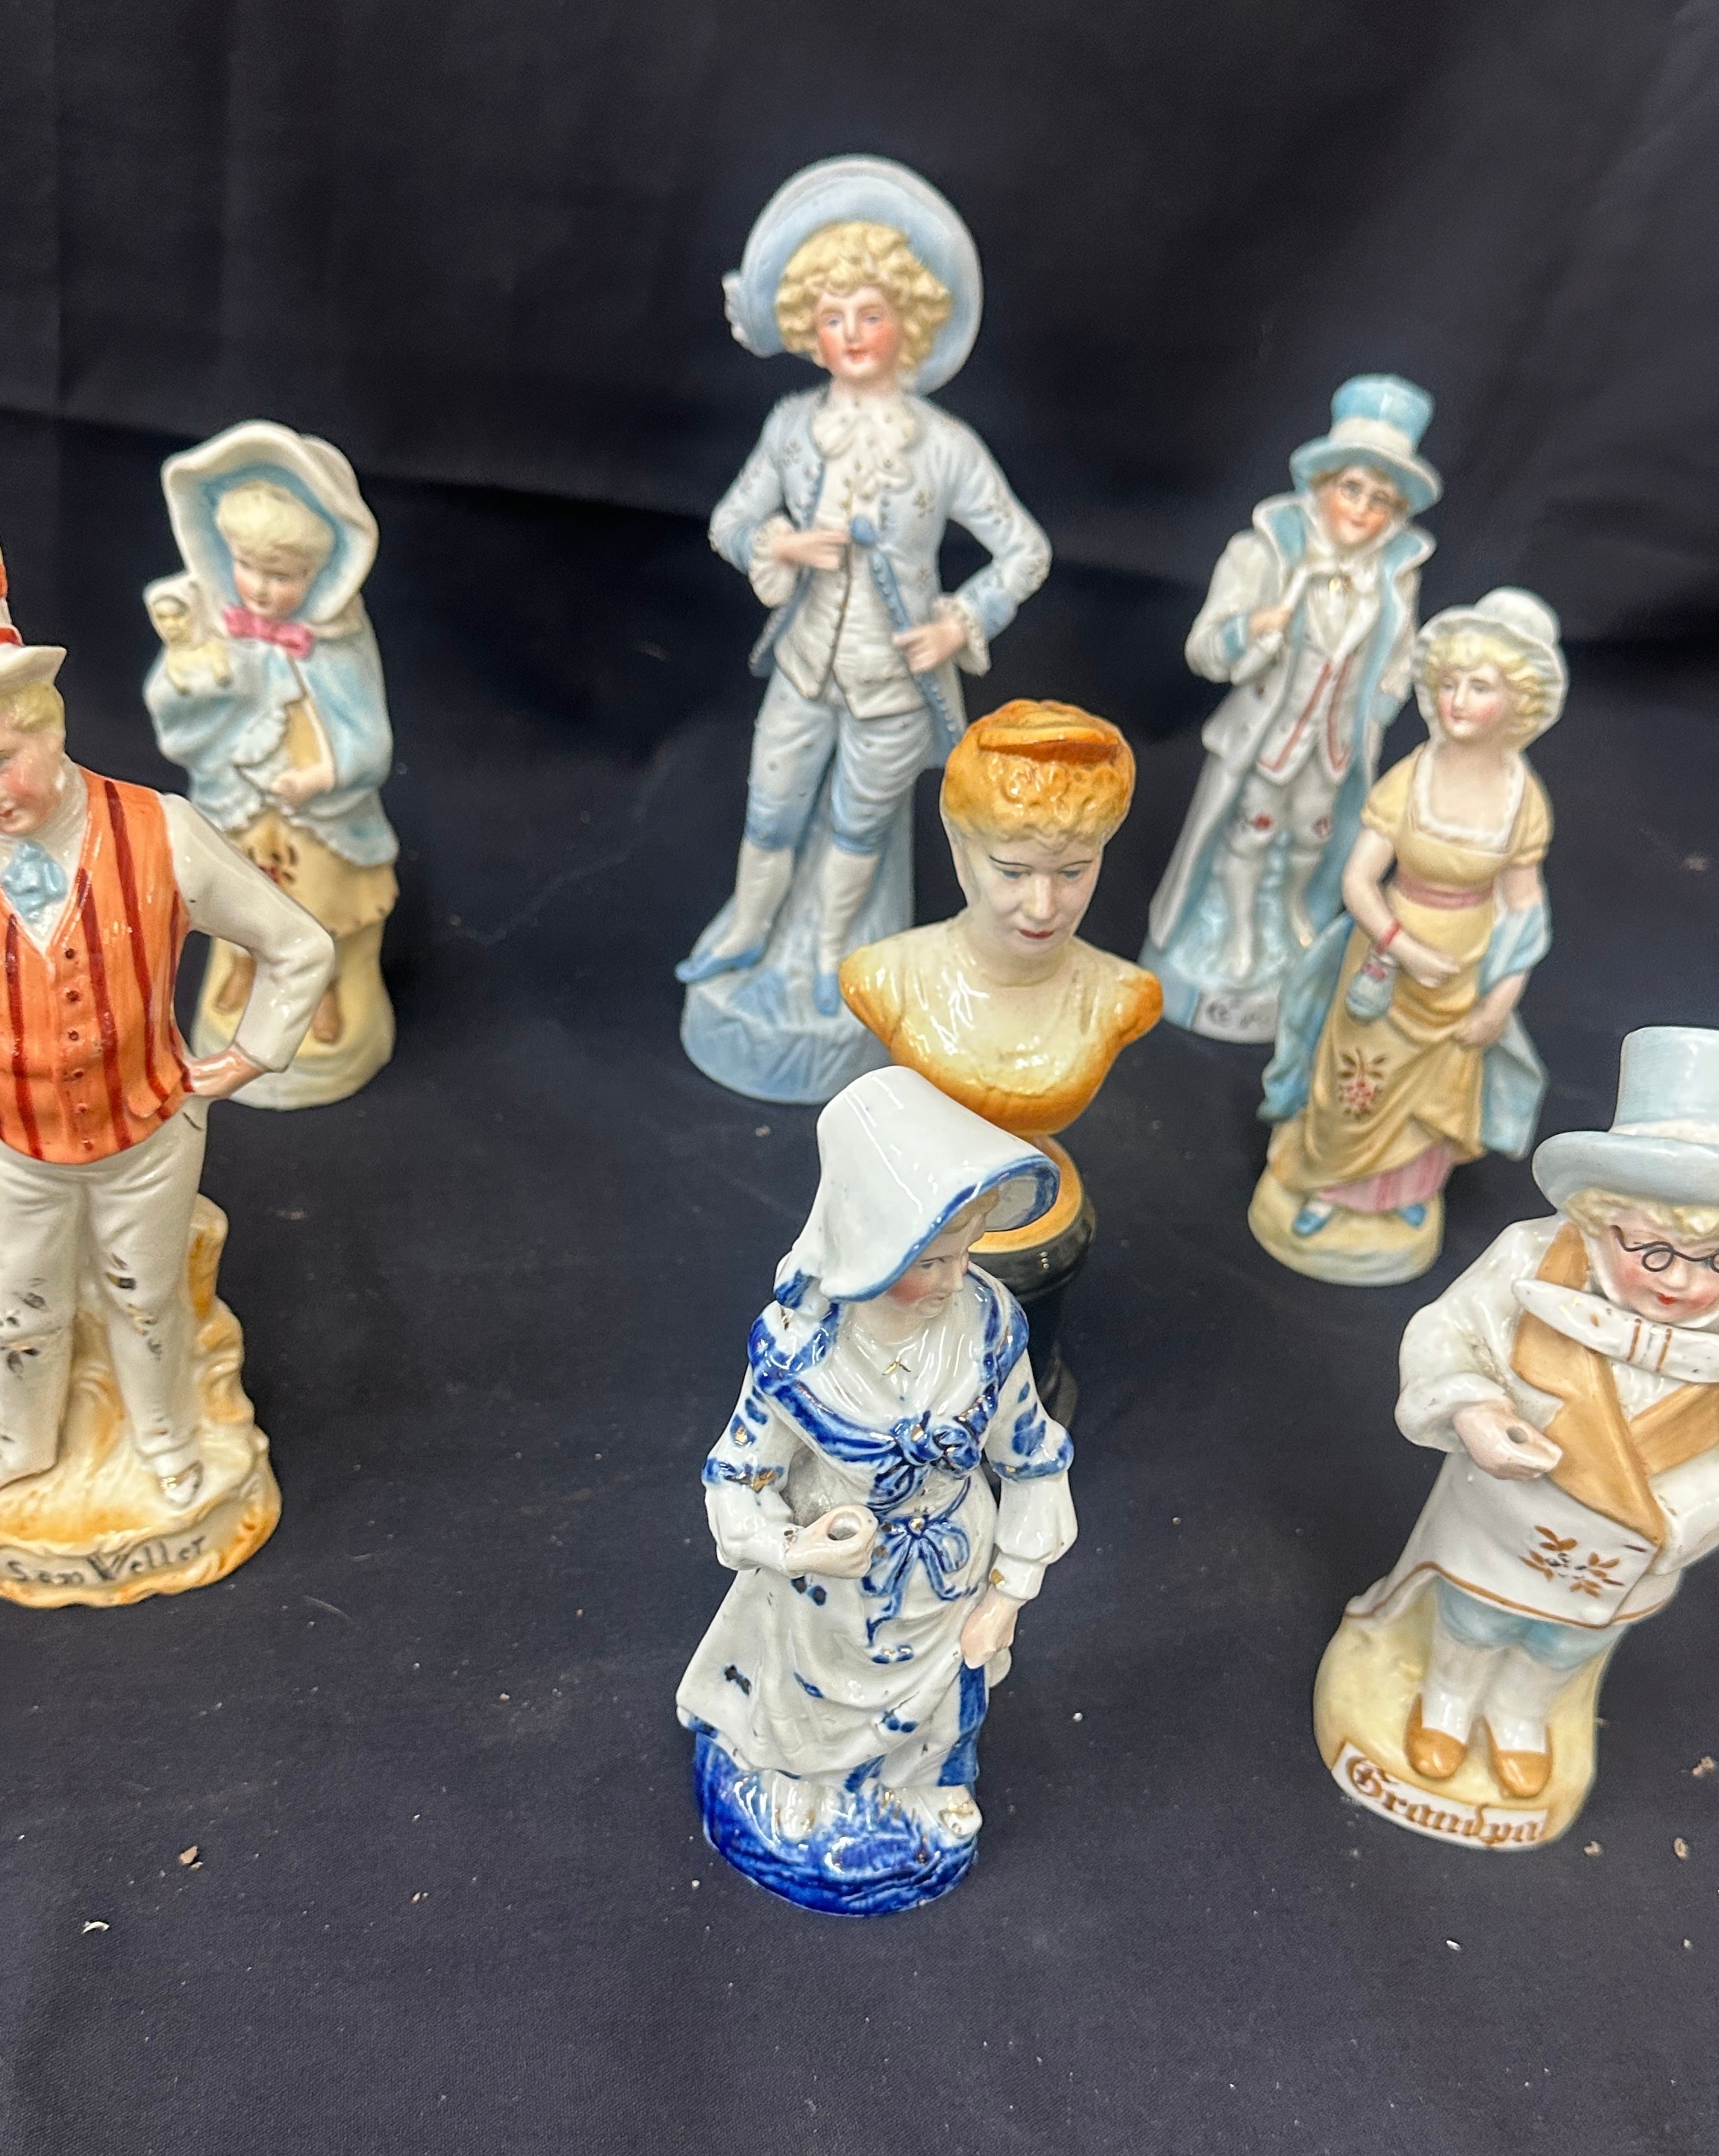 Quantity of antique bisque German figures tallest measures approx 10 inches - Image 4 of 5